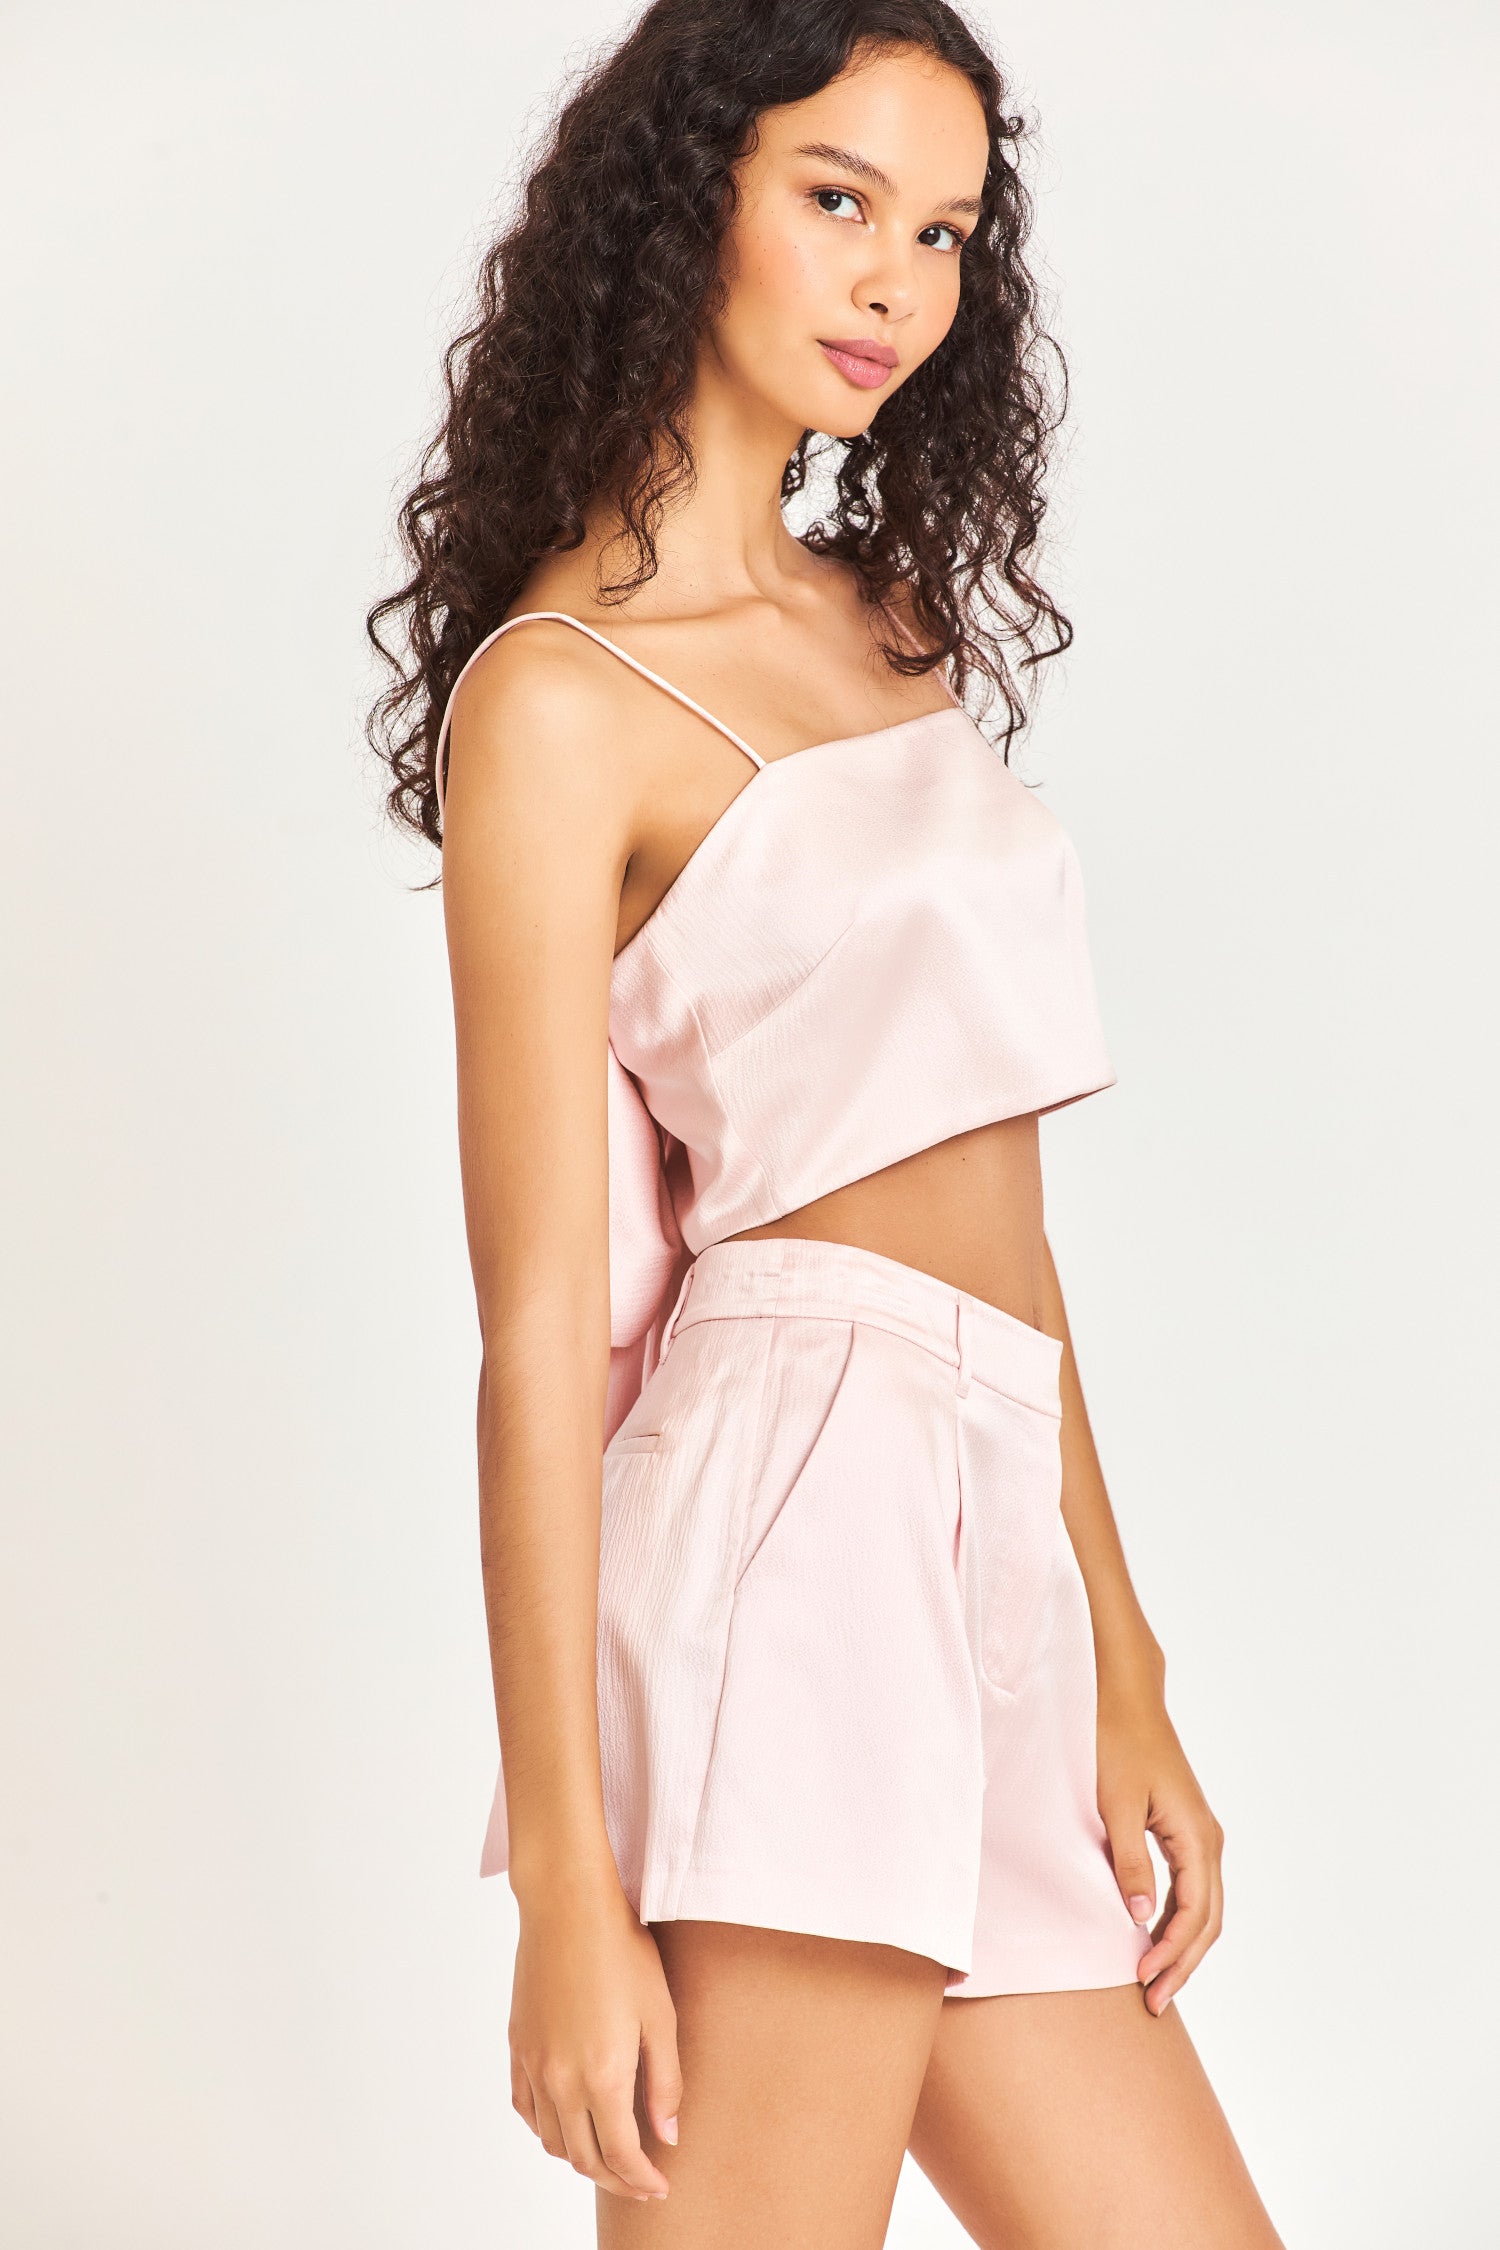 The Roasenna bandeau top is made of 100% silk and is a beautiful soft pink color. It has a side zipper, spaghetti straps, and a dramatic bow in the back. 